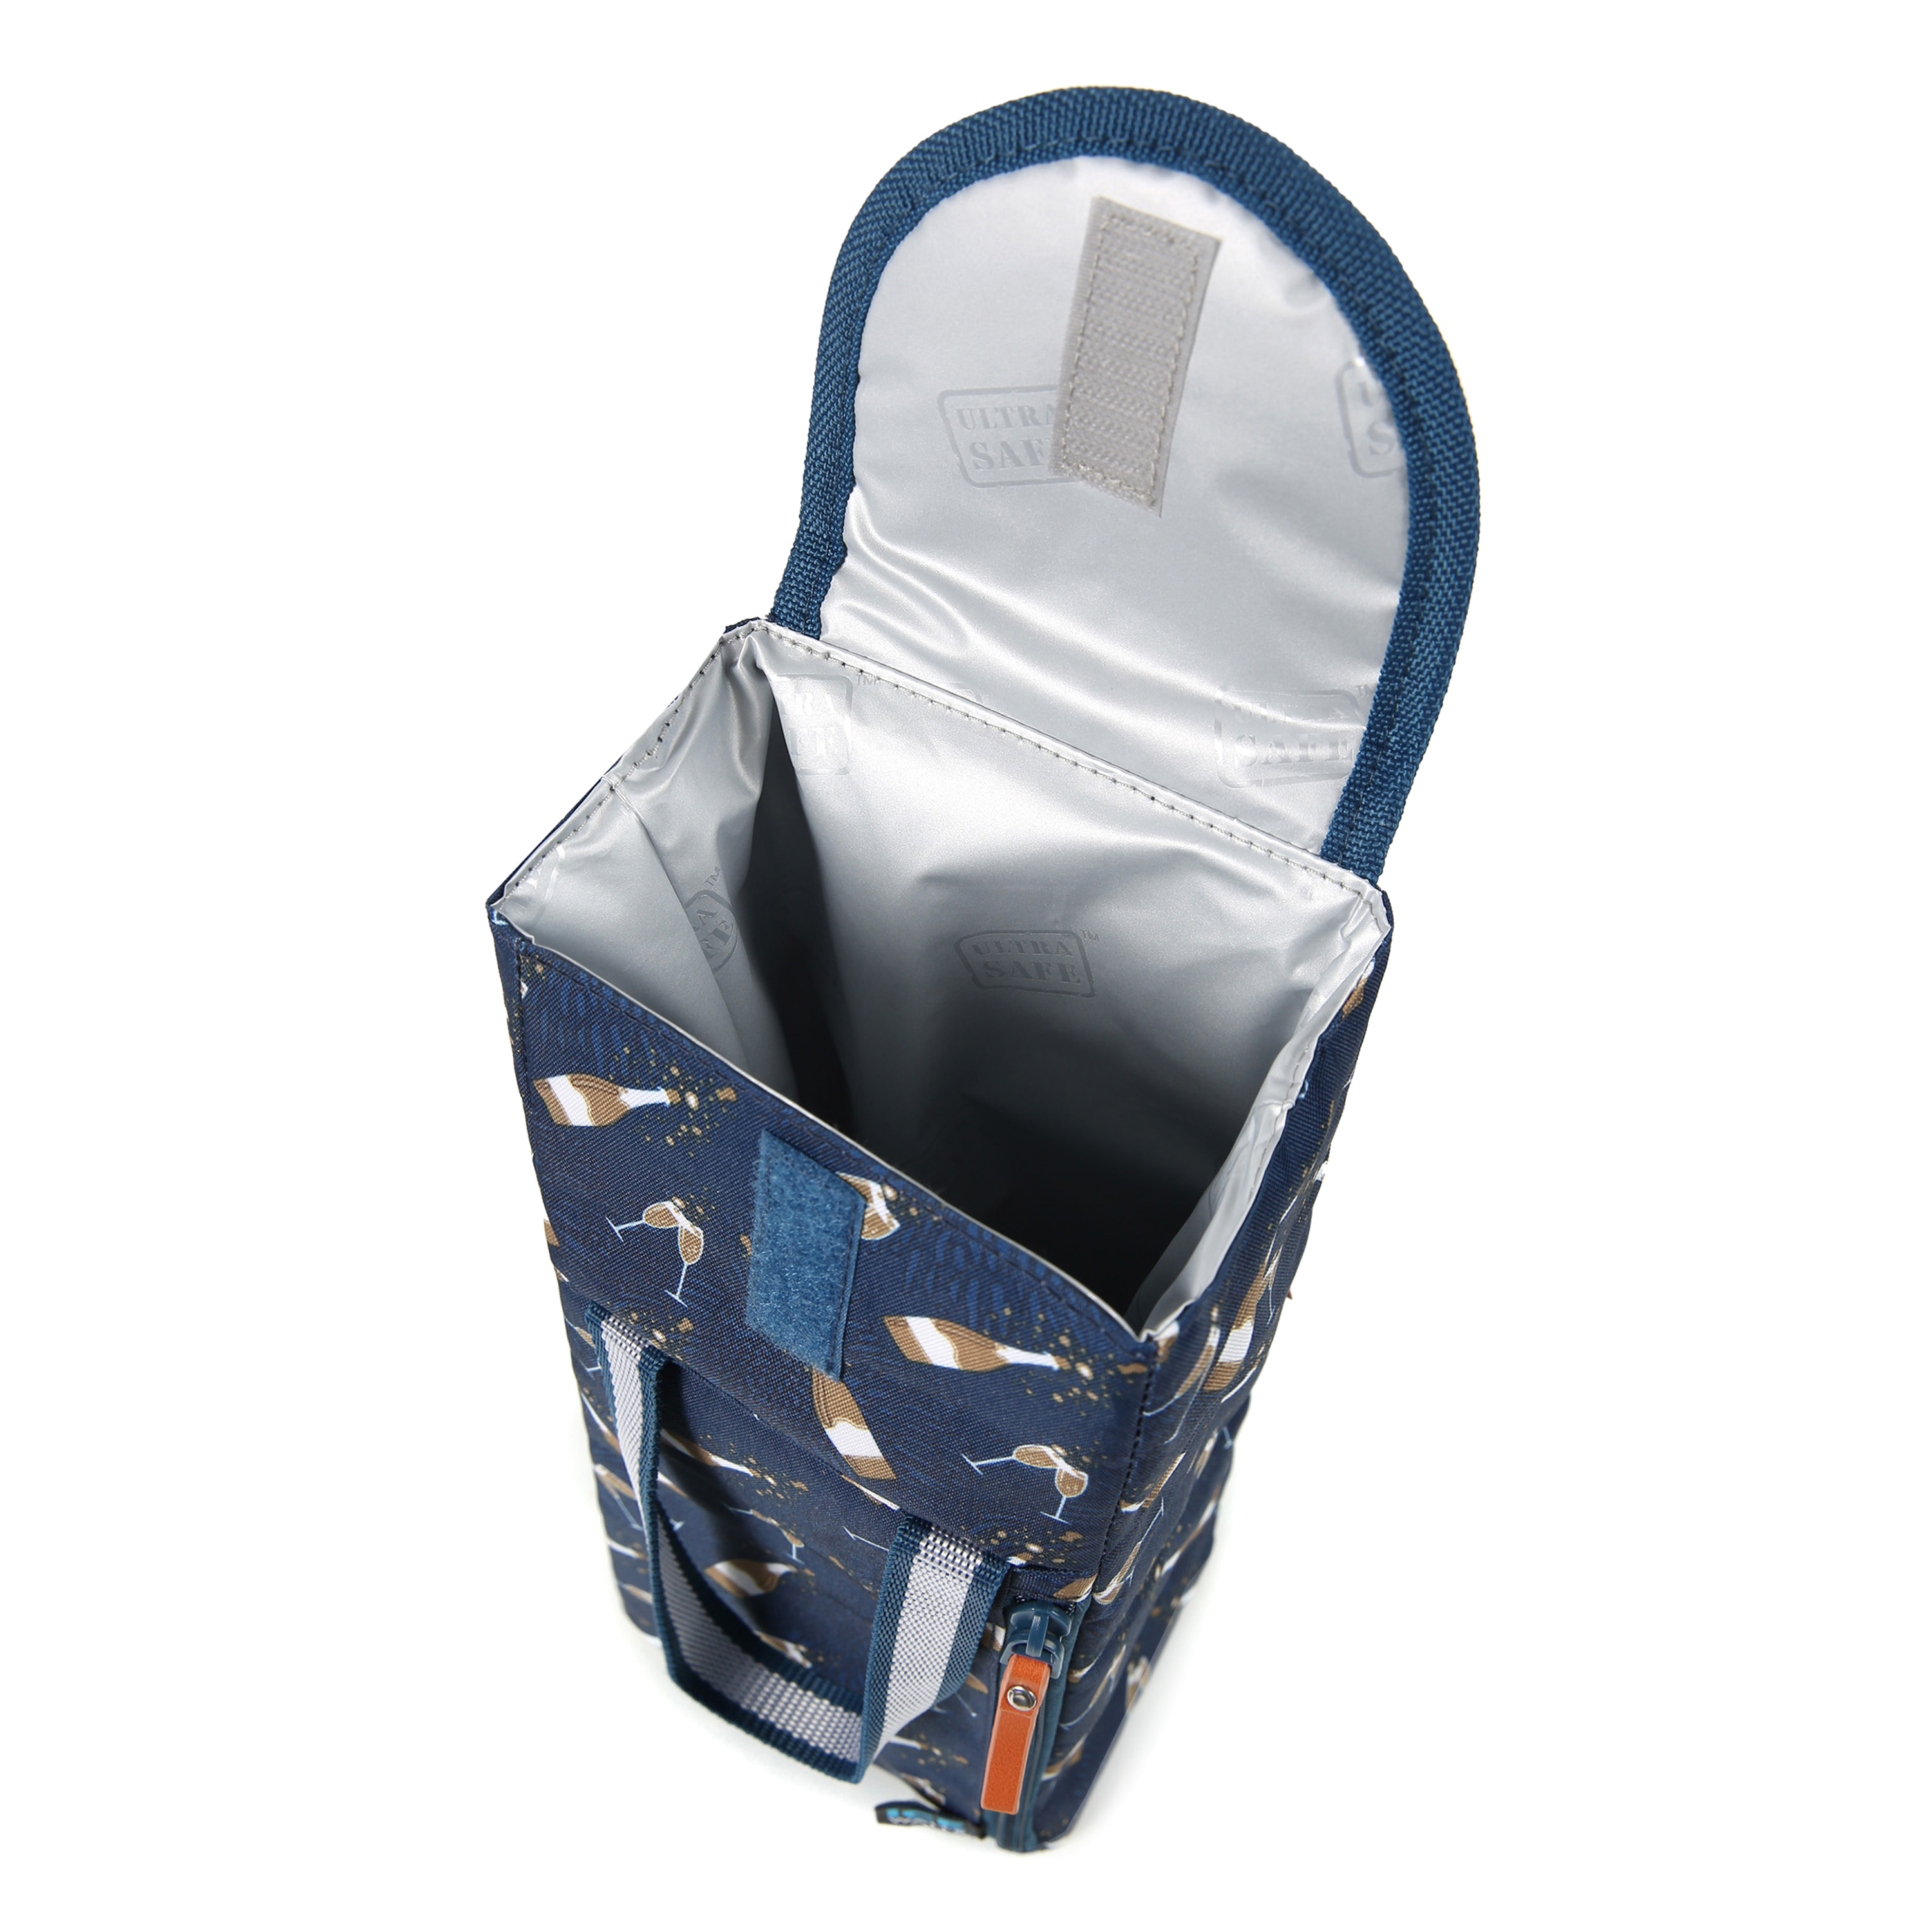 Arctic Zone Wine Tote Wine Bottle Bag, Navy Champagne - image 5 of 8